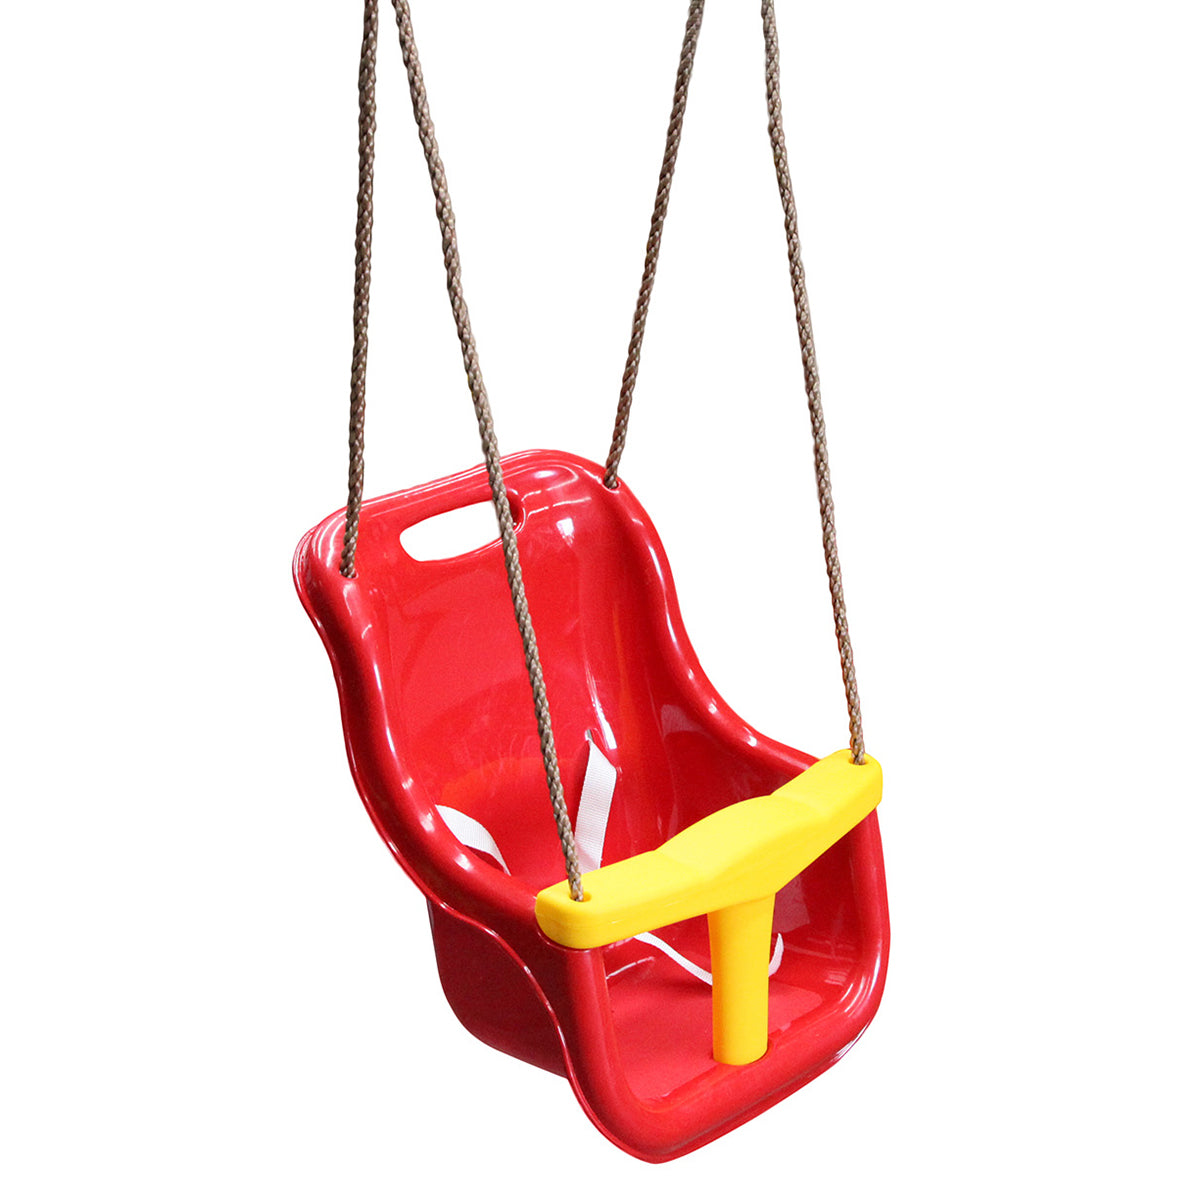 Lifespan Kids Baby Swing Seat Red with Rope Extensions